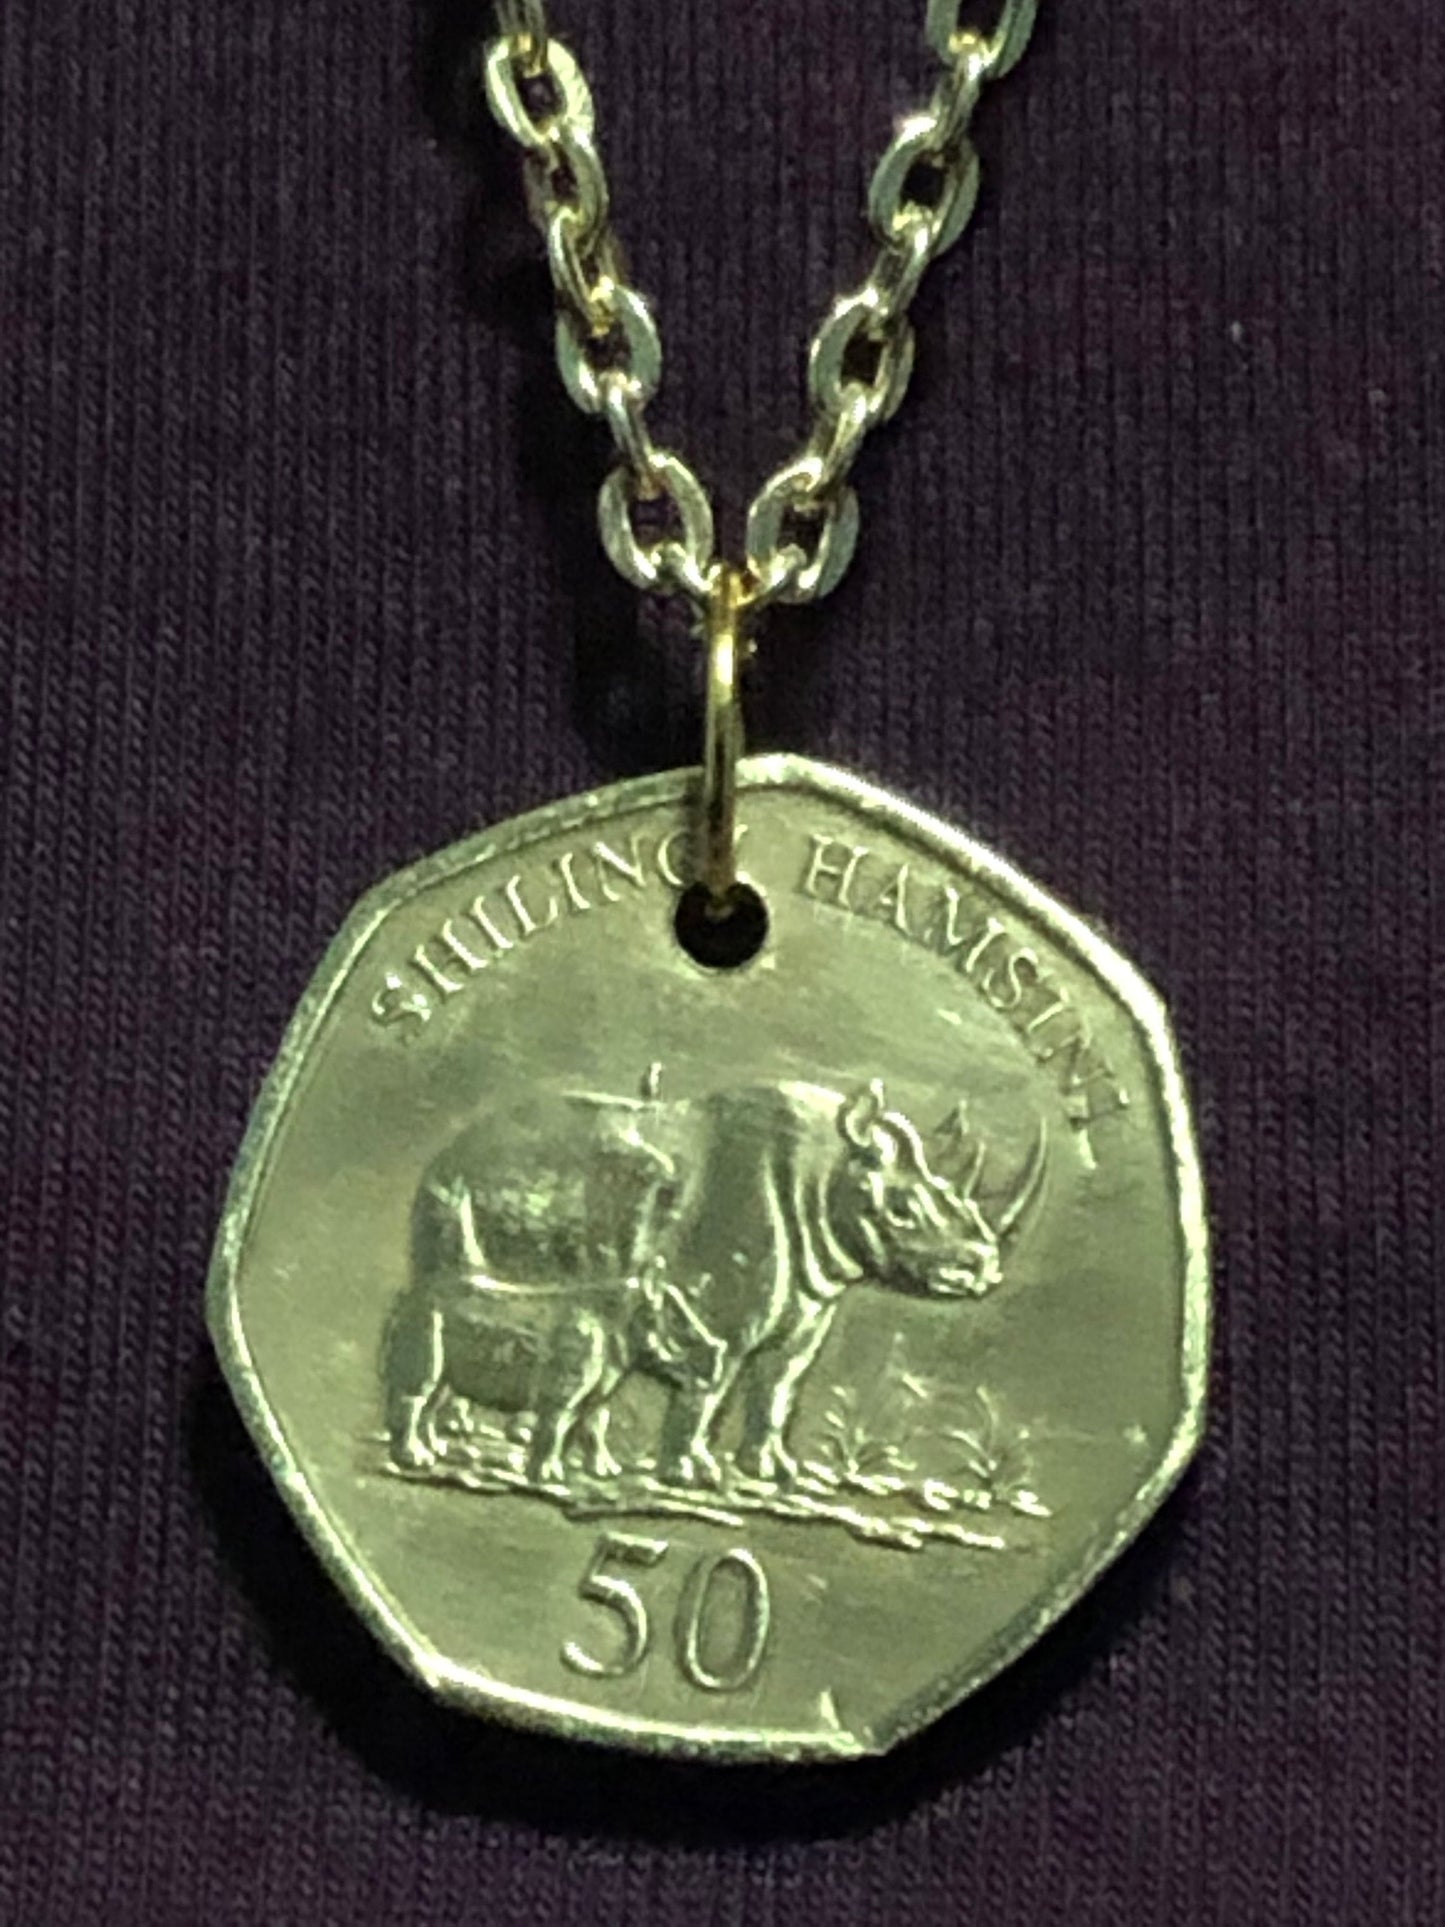 Tanzania 50 Shilling Coin Pendant Necklace Tanzanian Personal Vintage Handmade Jewelry Gift Friend Charm For Him Her World Coin Collector